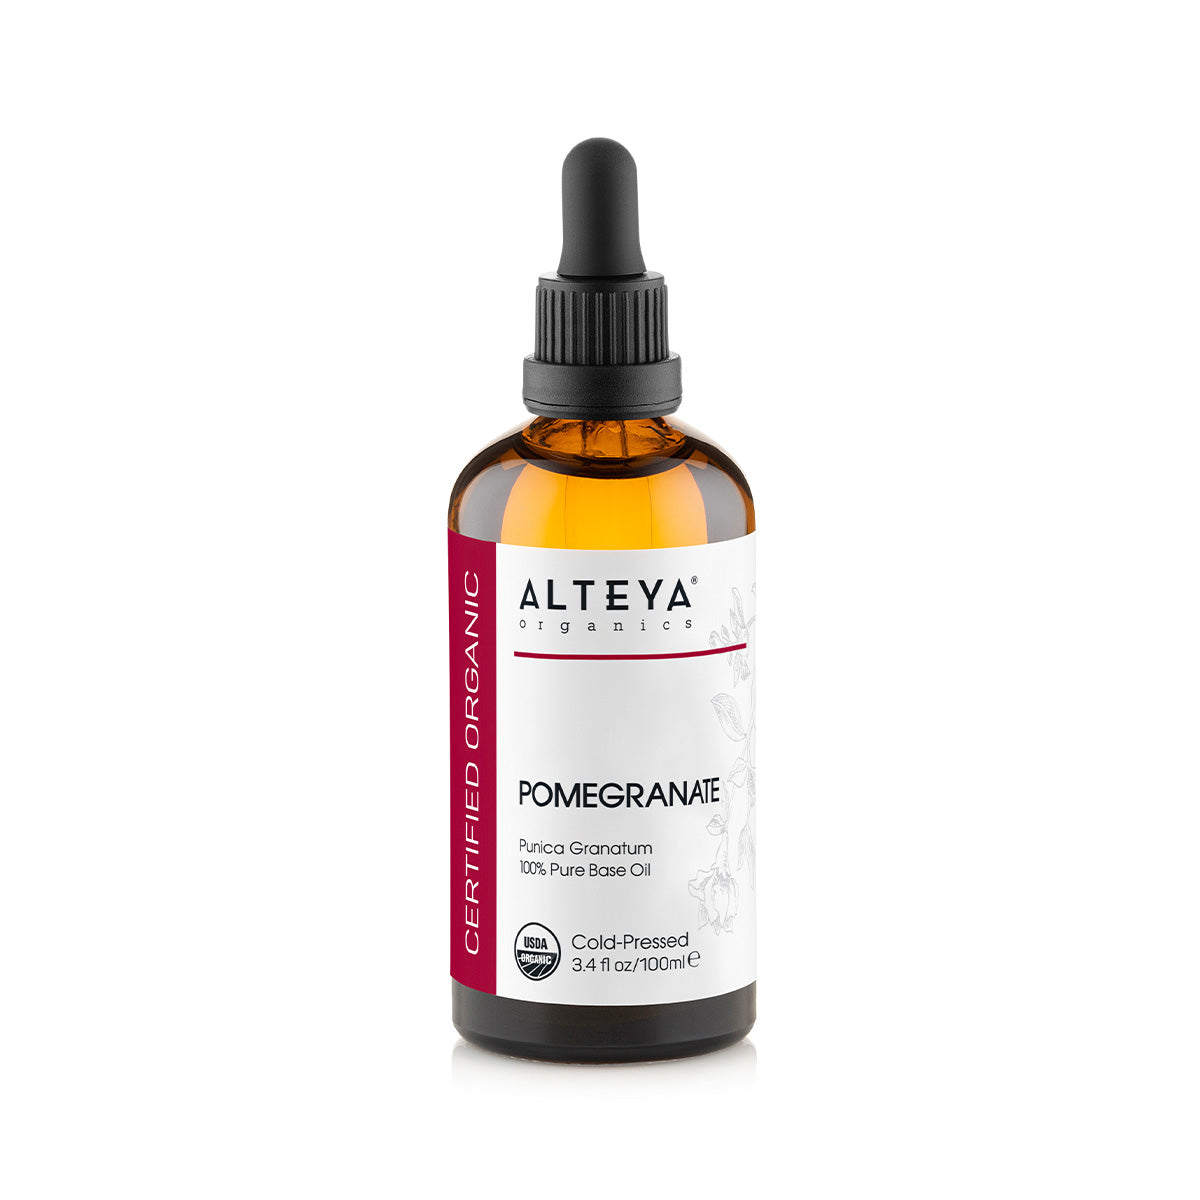 A bottle of Alteya Organics Organic Pomegranate Carrier Oil, a rich source of essential fatty acids, on a white background.